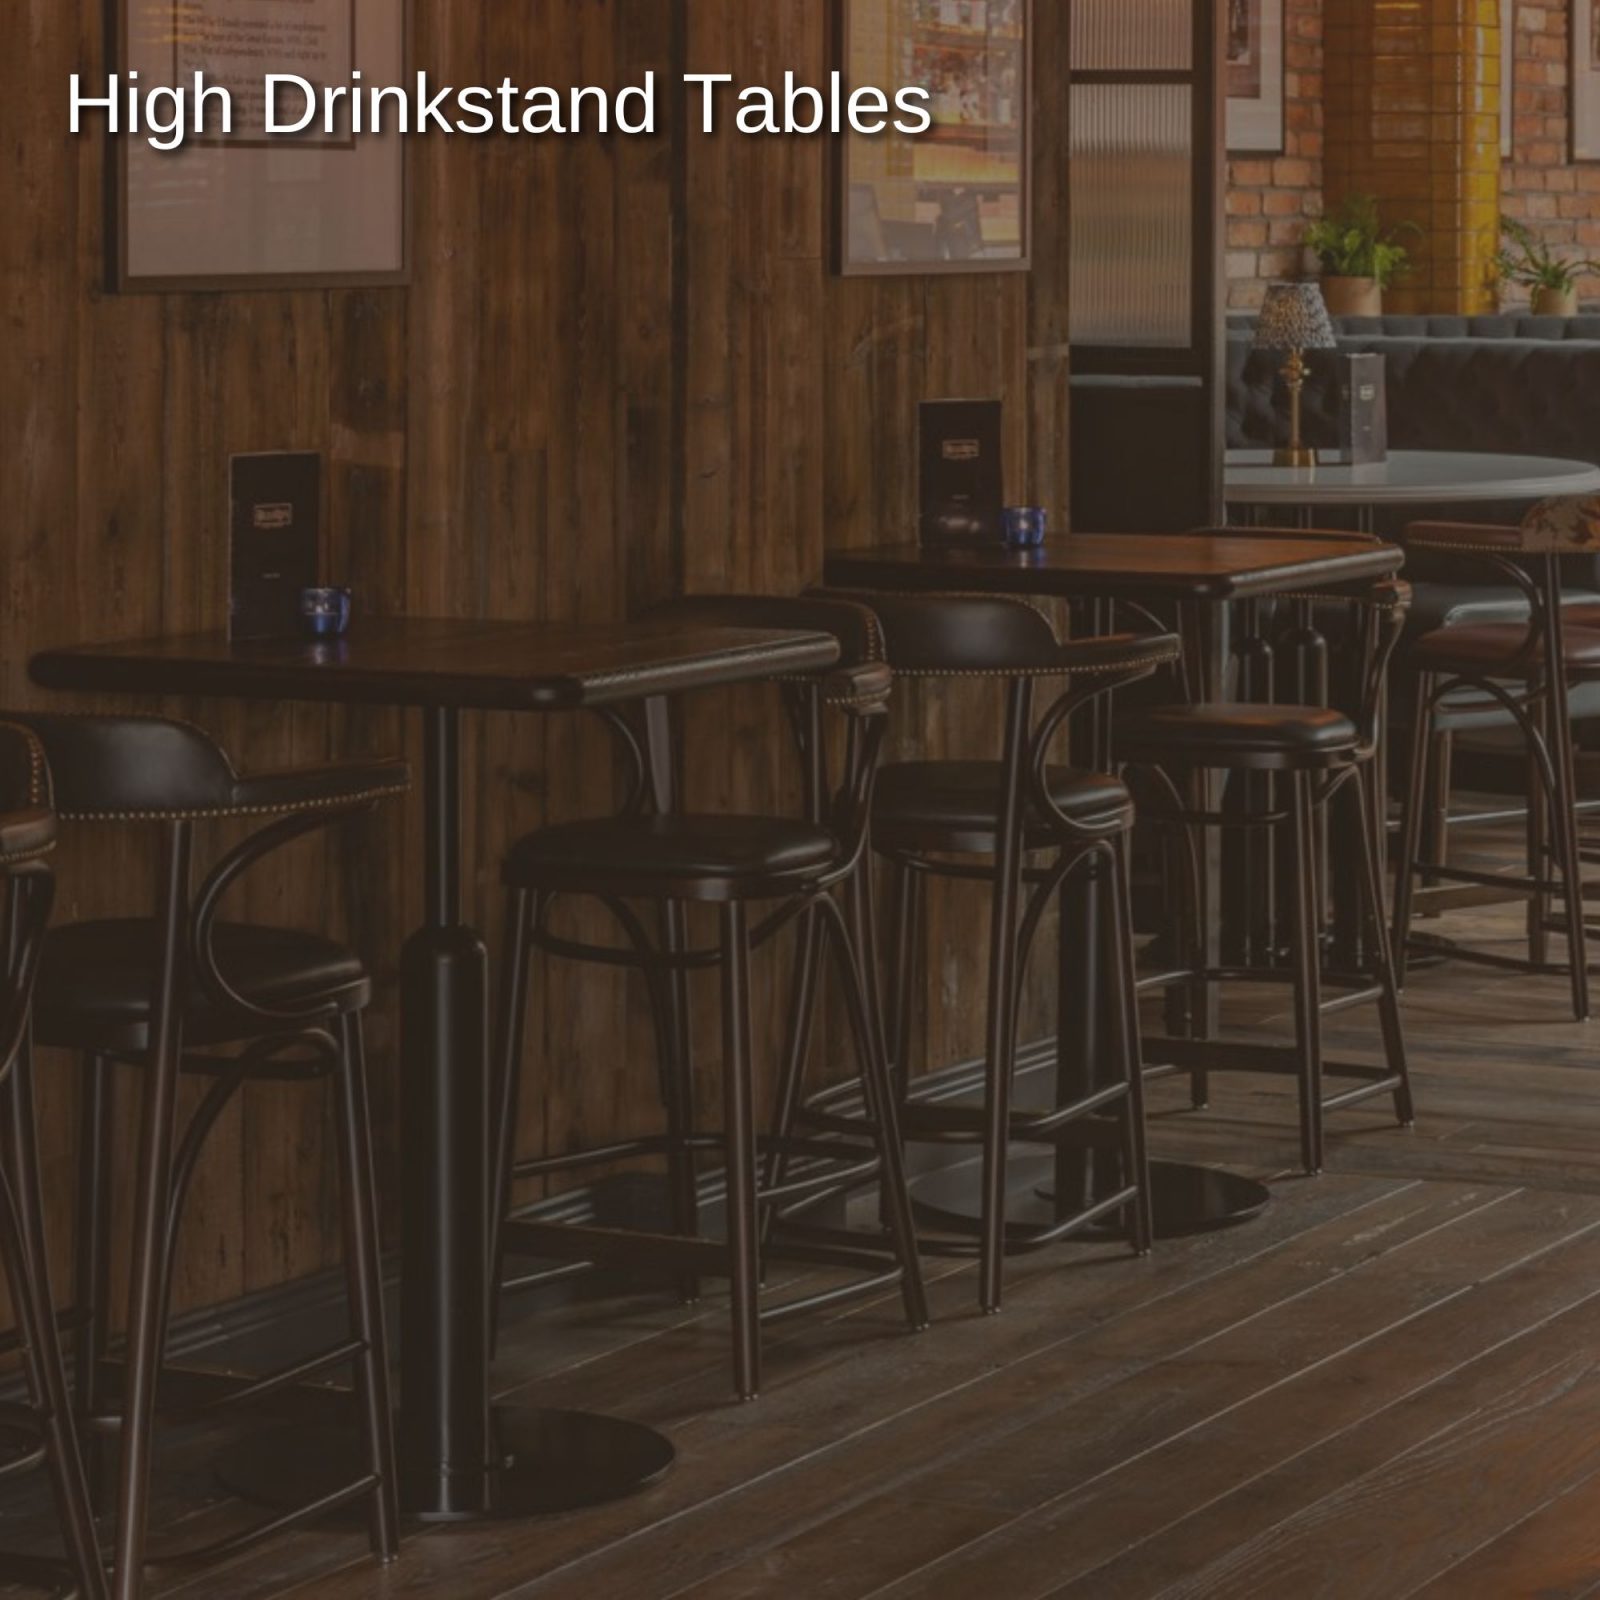 High Drinkstand Tables 1